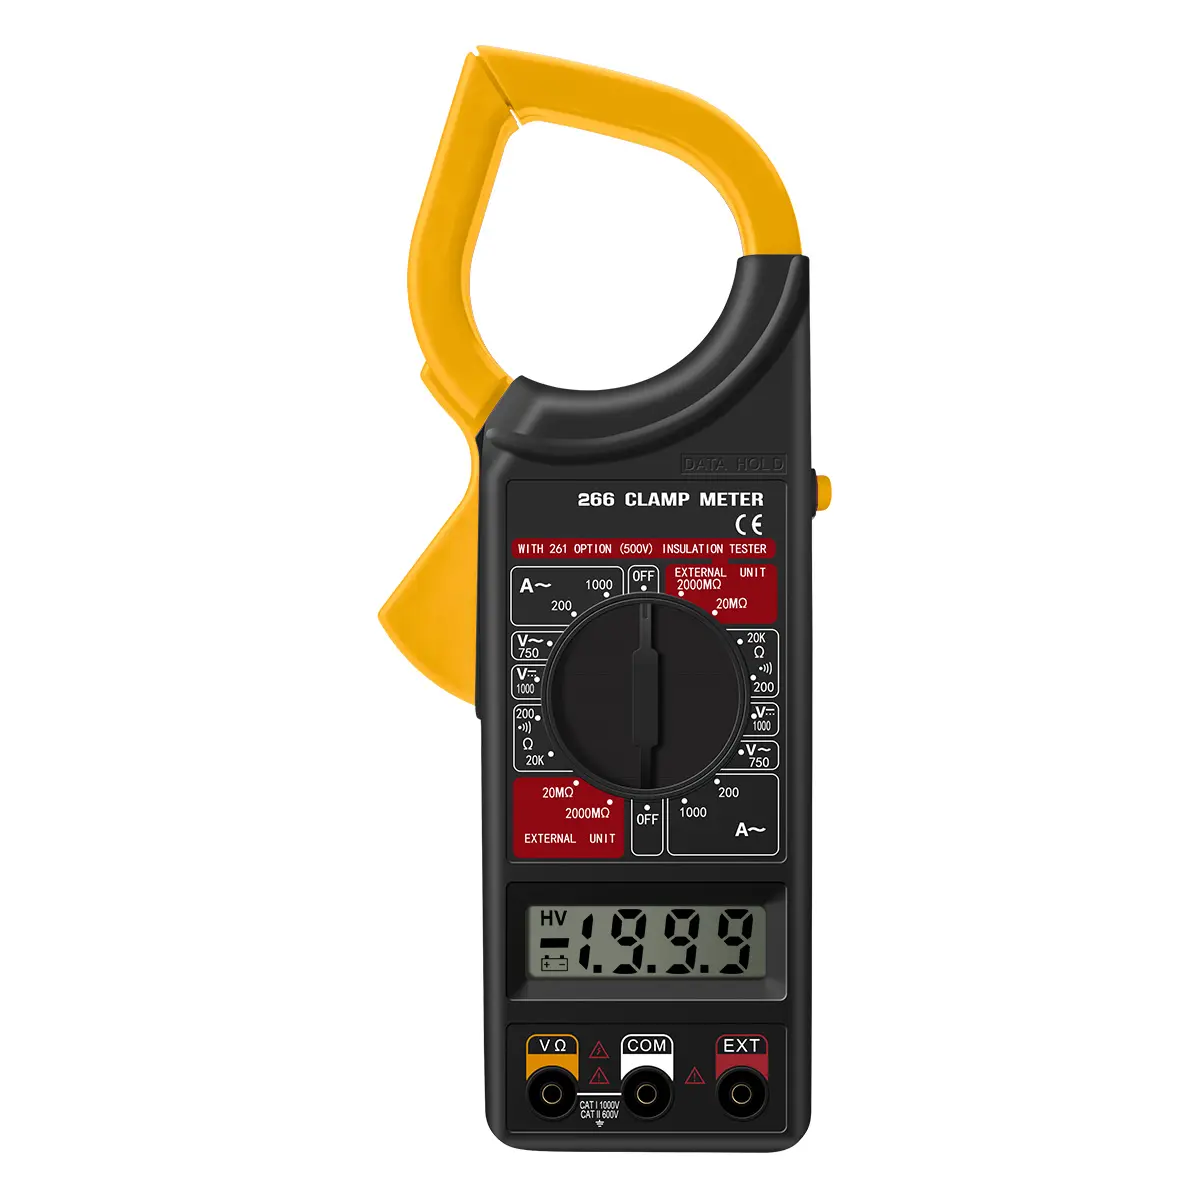 ANENG DT266 LCD 1999 Count Digital True RMS Professional Clamp Meter ACDC Current Voltage Tester Data Show Auto Multimeter Clamp